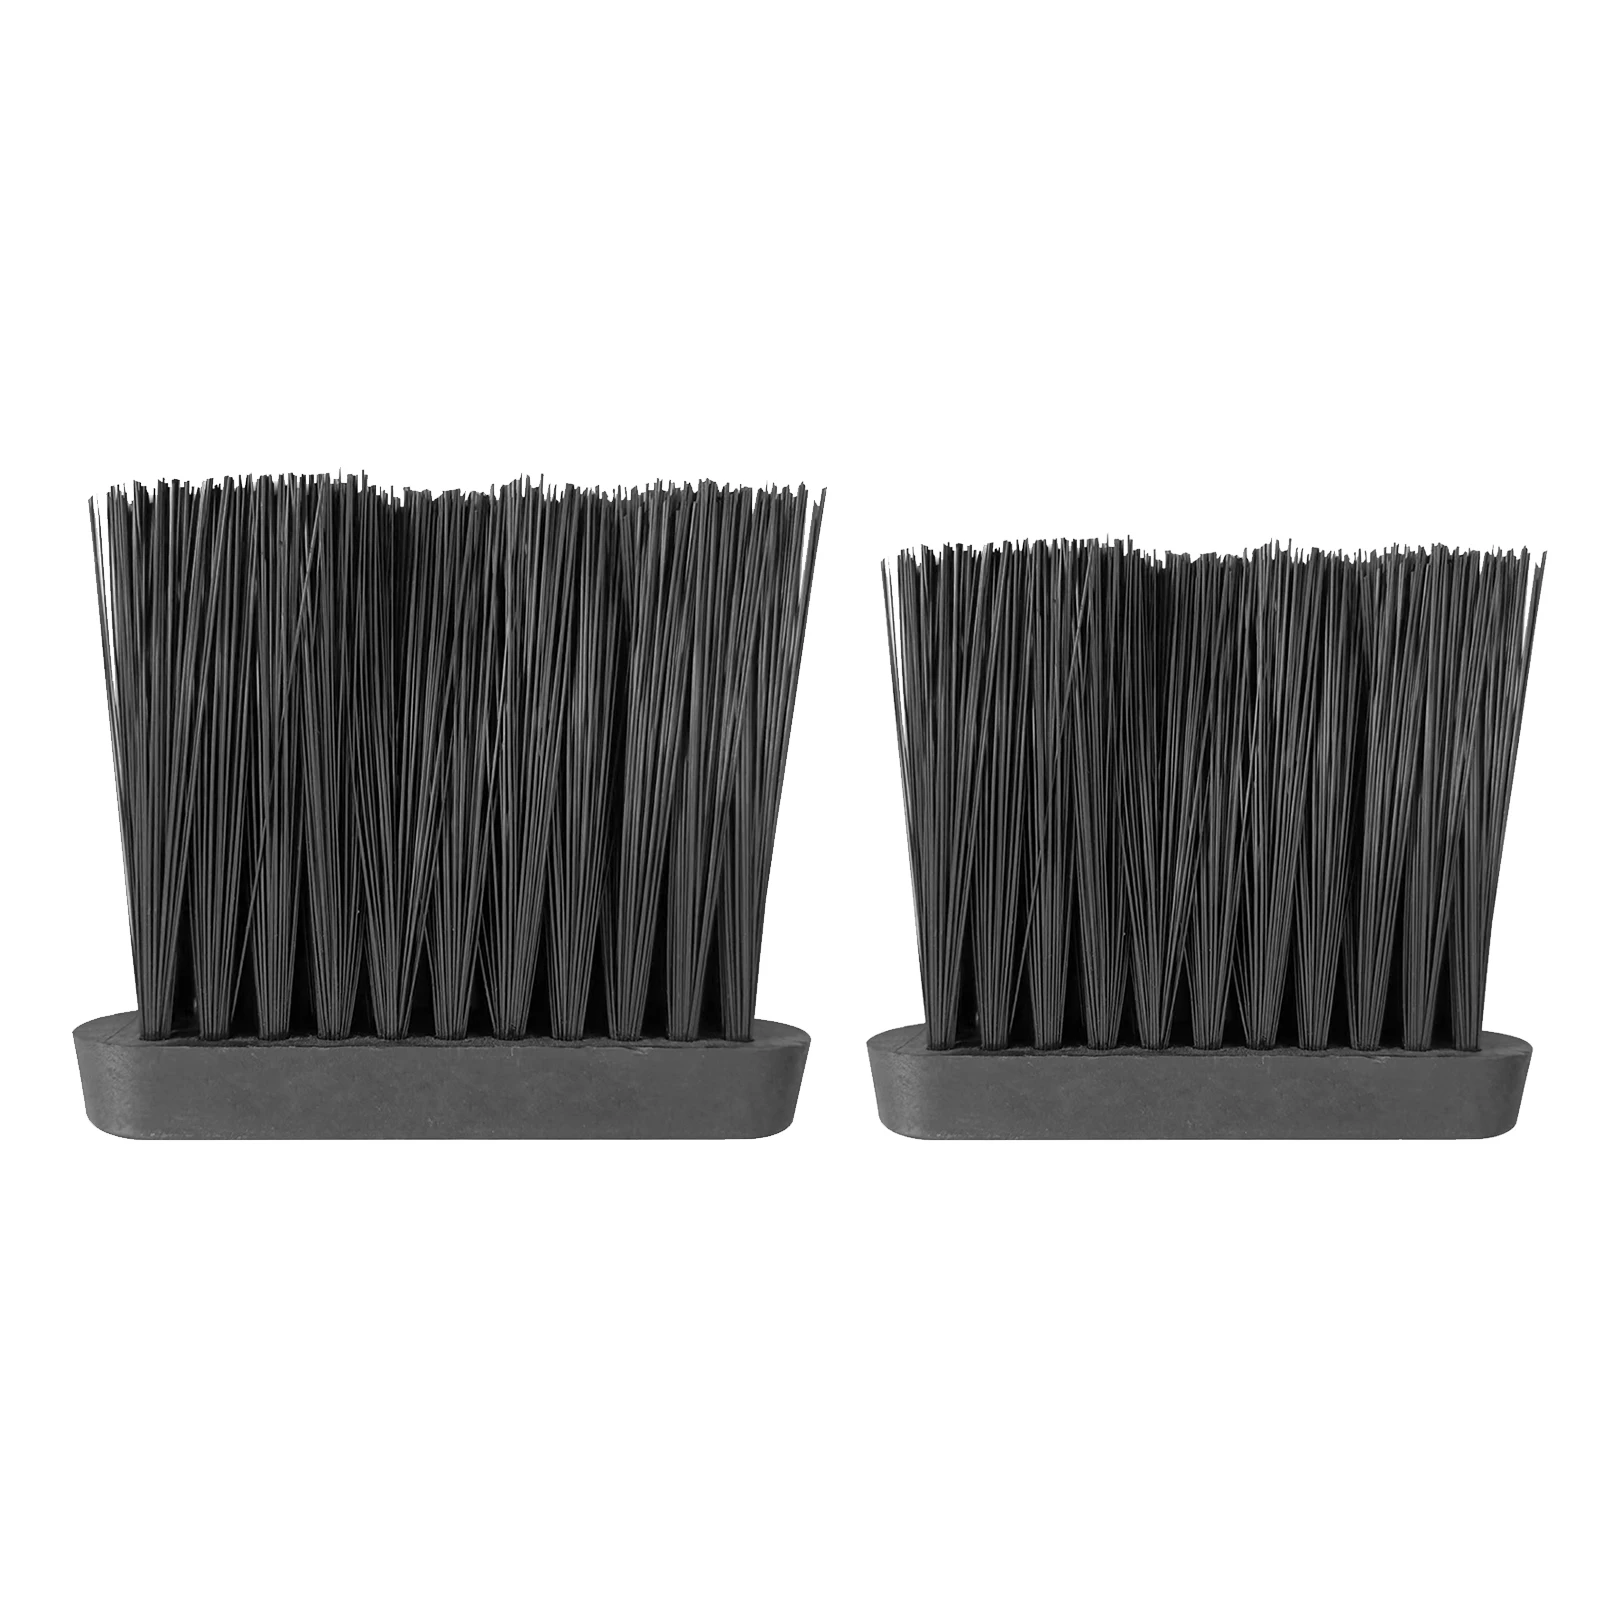 2pcs Fireplace Home Stoves Accessories Companion Tool Replacement Parts Hearth Brush Head Spare Refill Professional Durable